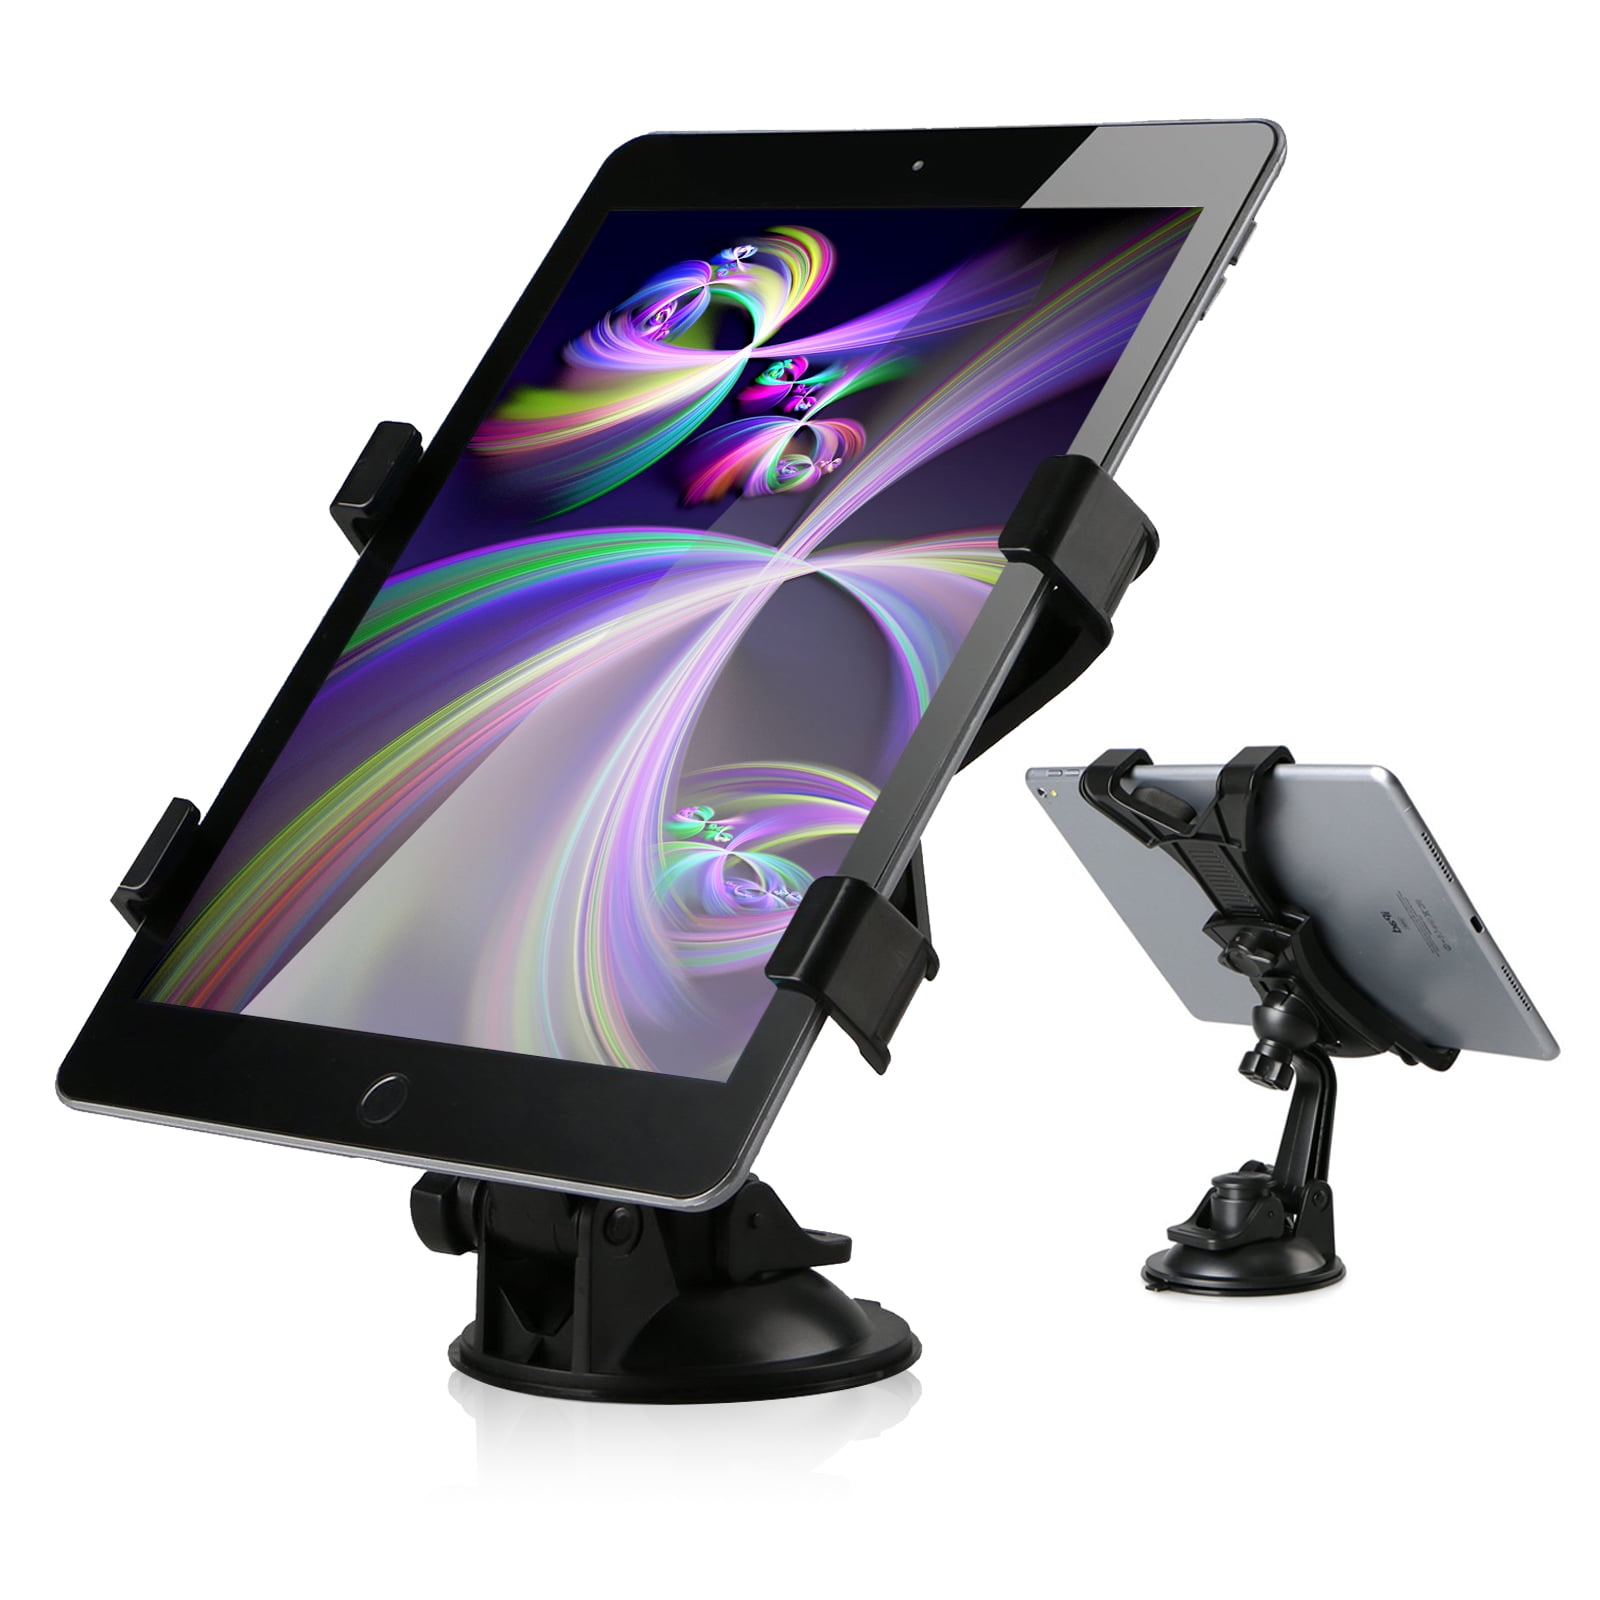 Details about   Puppy Mobile Cell Phone Tablet Stand Holder Kickstand for Any Devices 